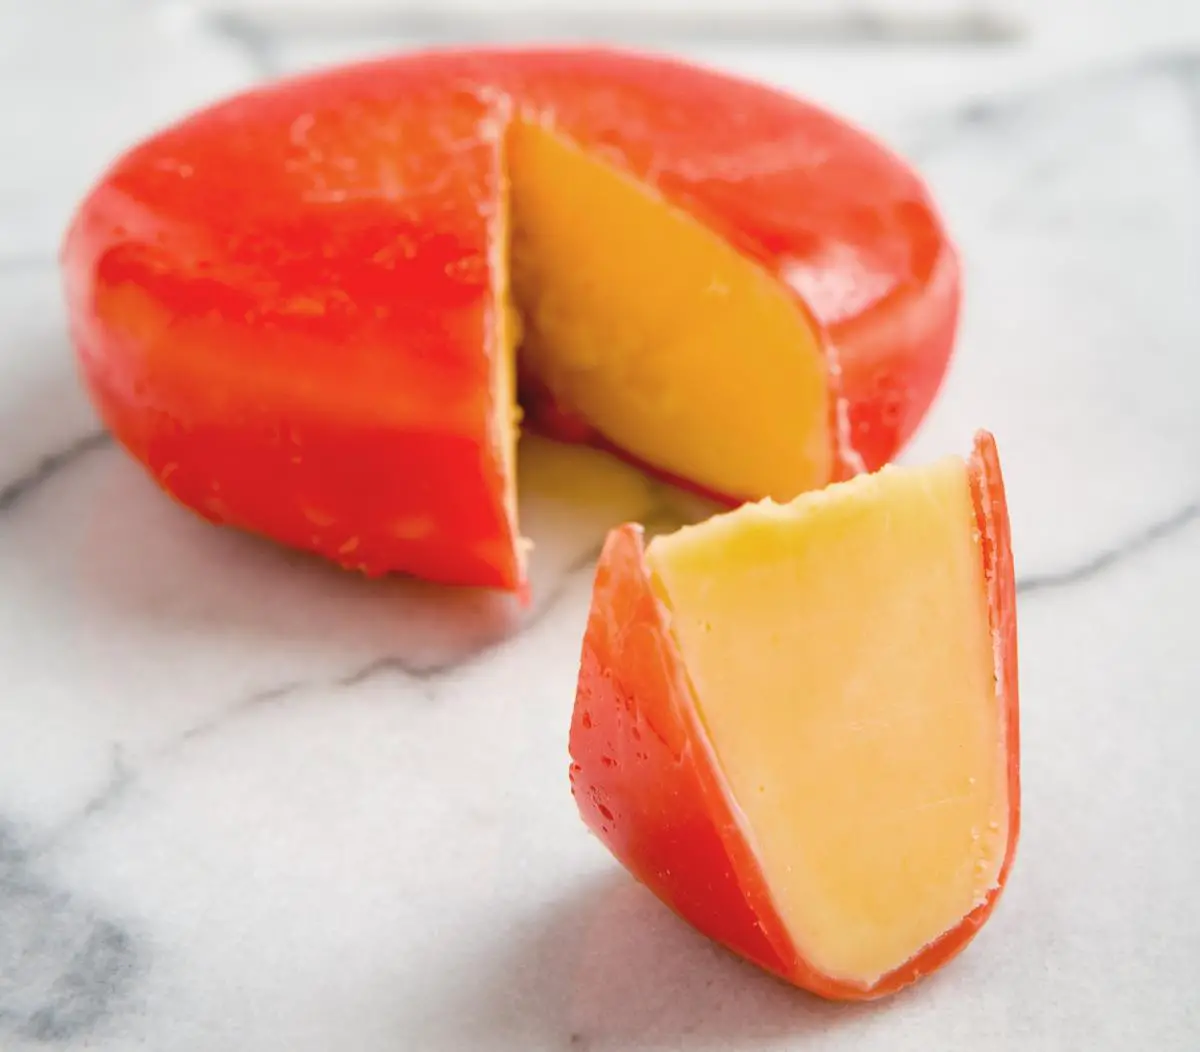 The Complete Procedure on How to Make Gouda Cheese at Home ...